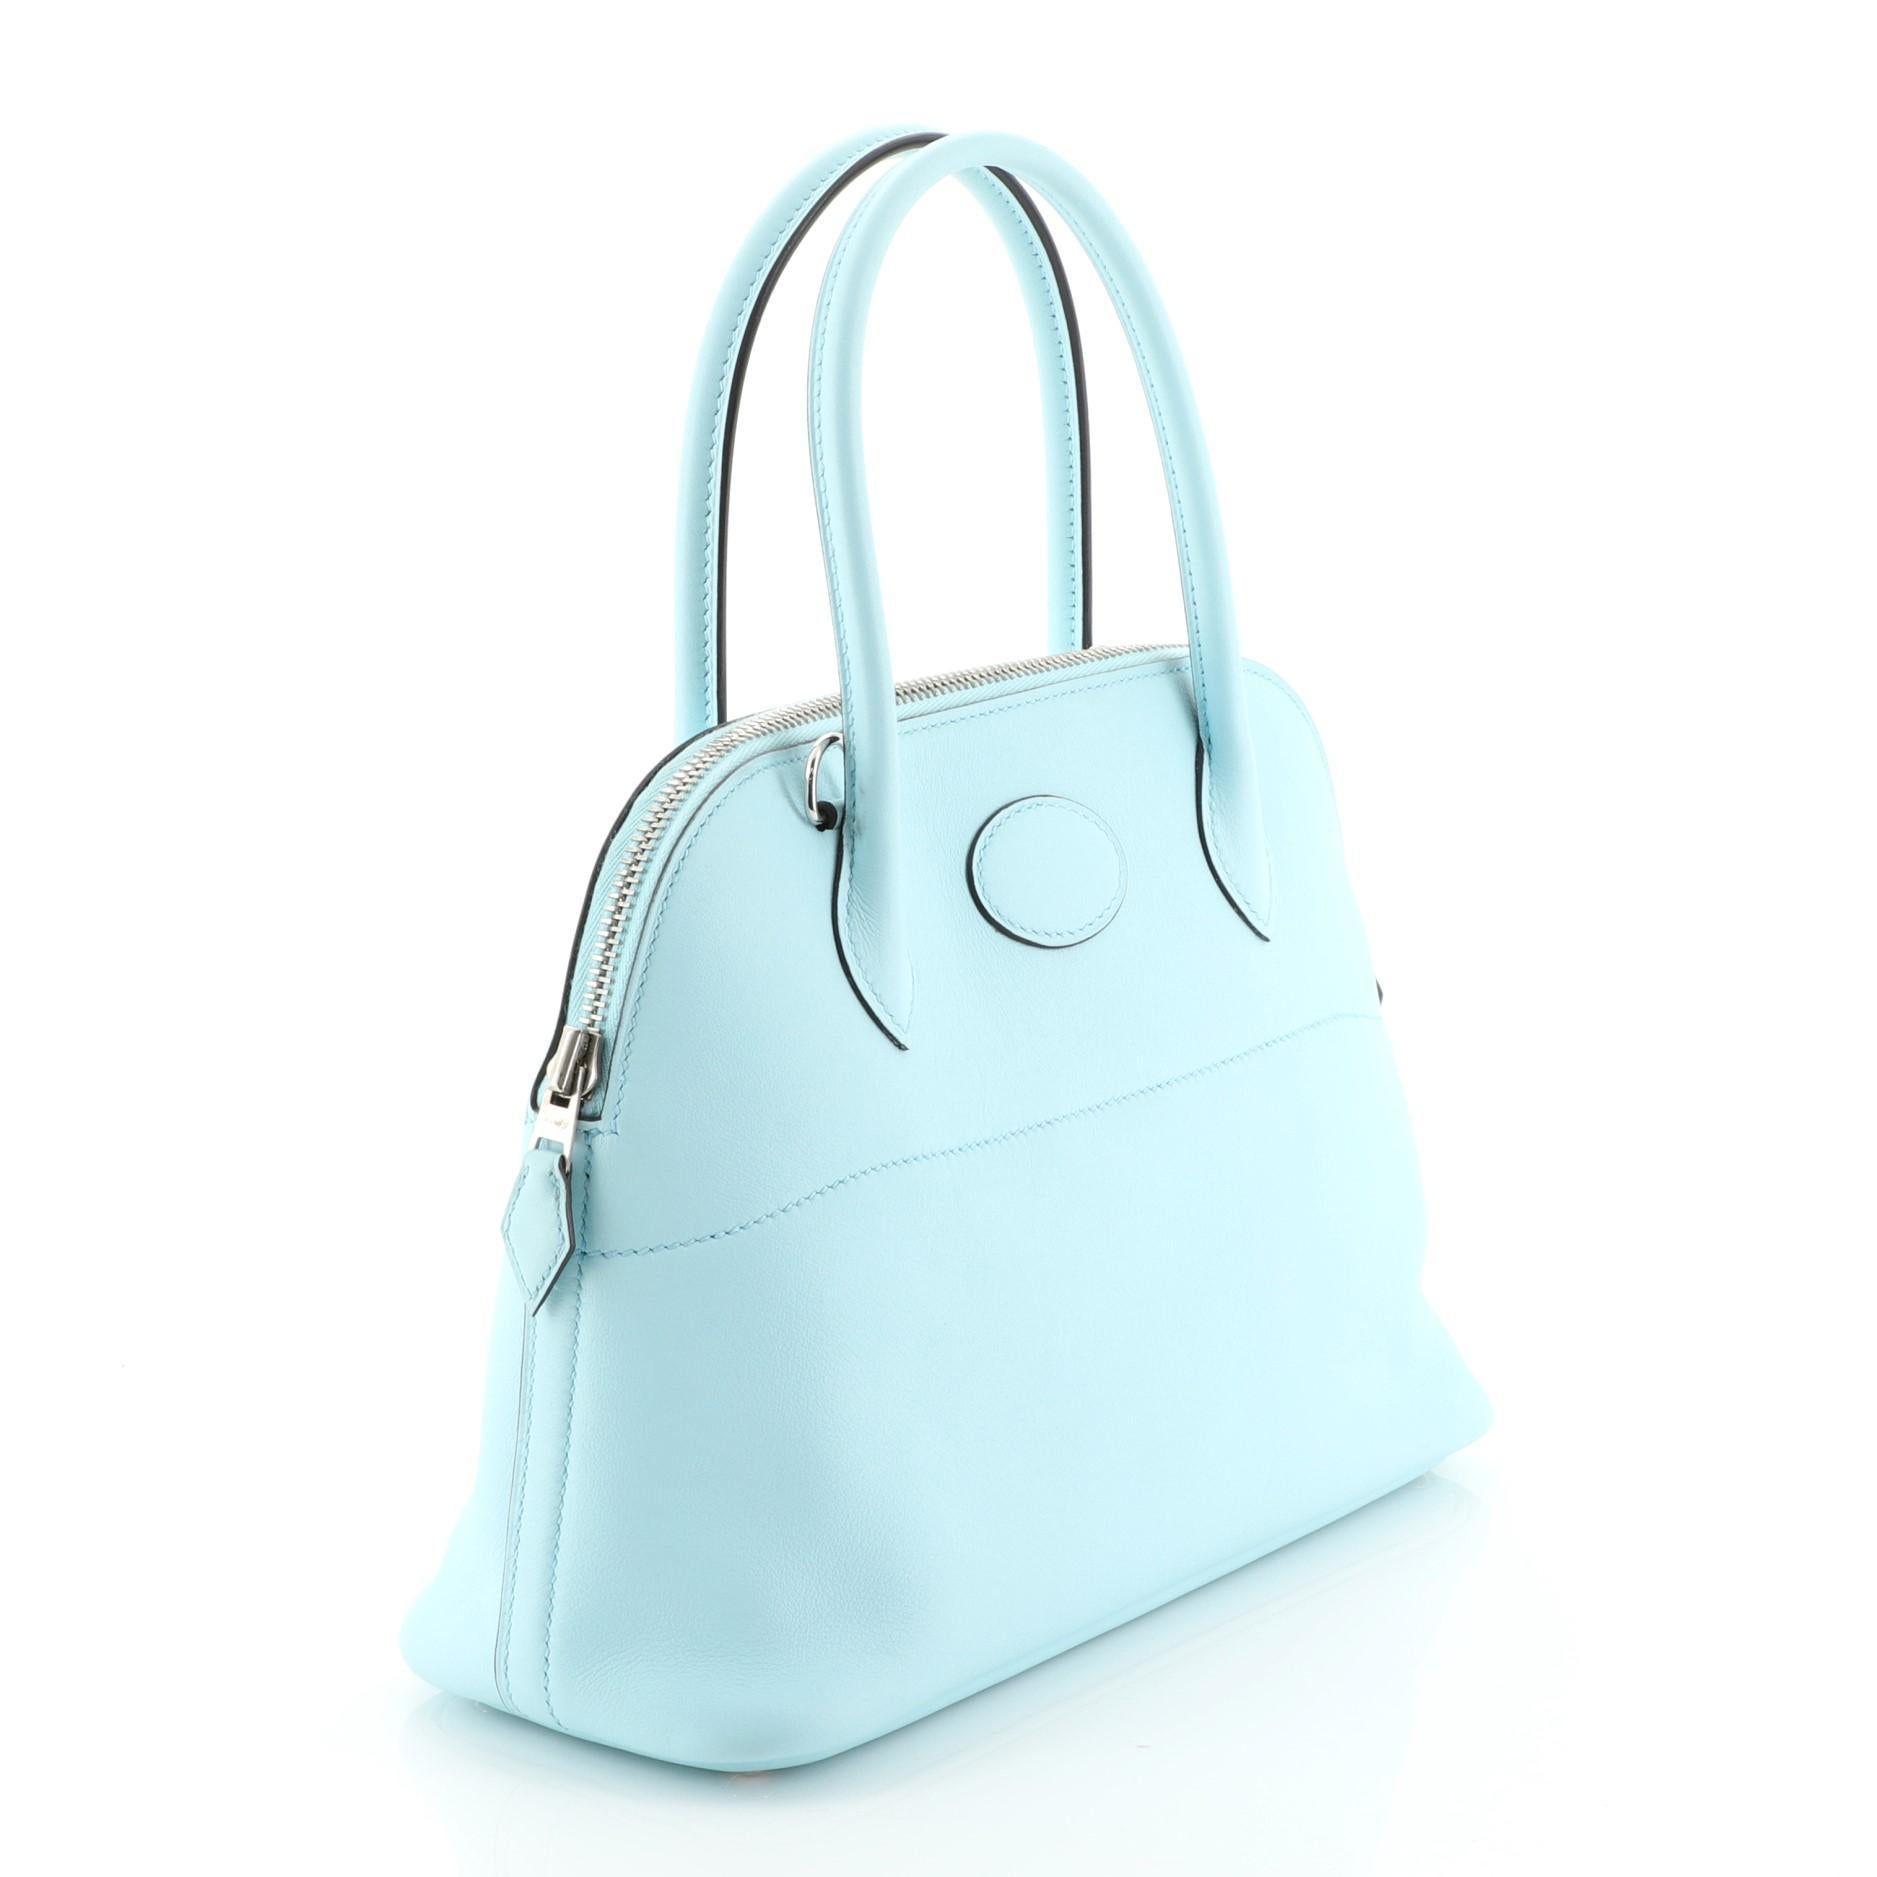 This Hermes Bolide Handbag Swift 27, crafted from Bleu Zephyr blue Swift leather, features dual rolled leather handles, protective base studs, and palladium hardware. Its zip closure opens to a Bleu Zephyr blue Swift leather interior. Date stamp